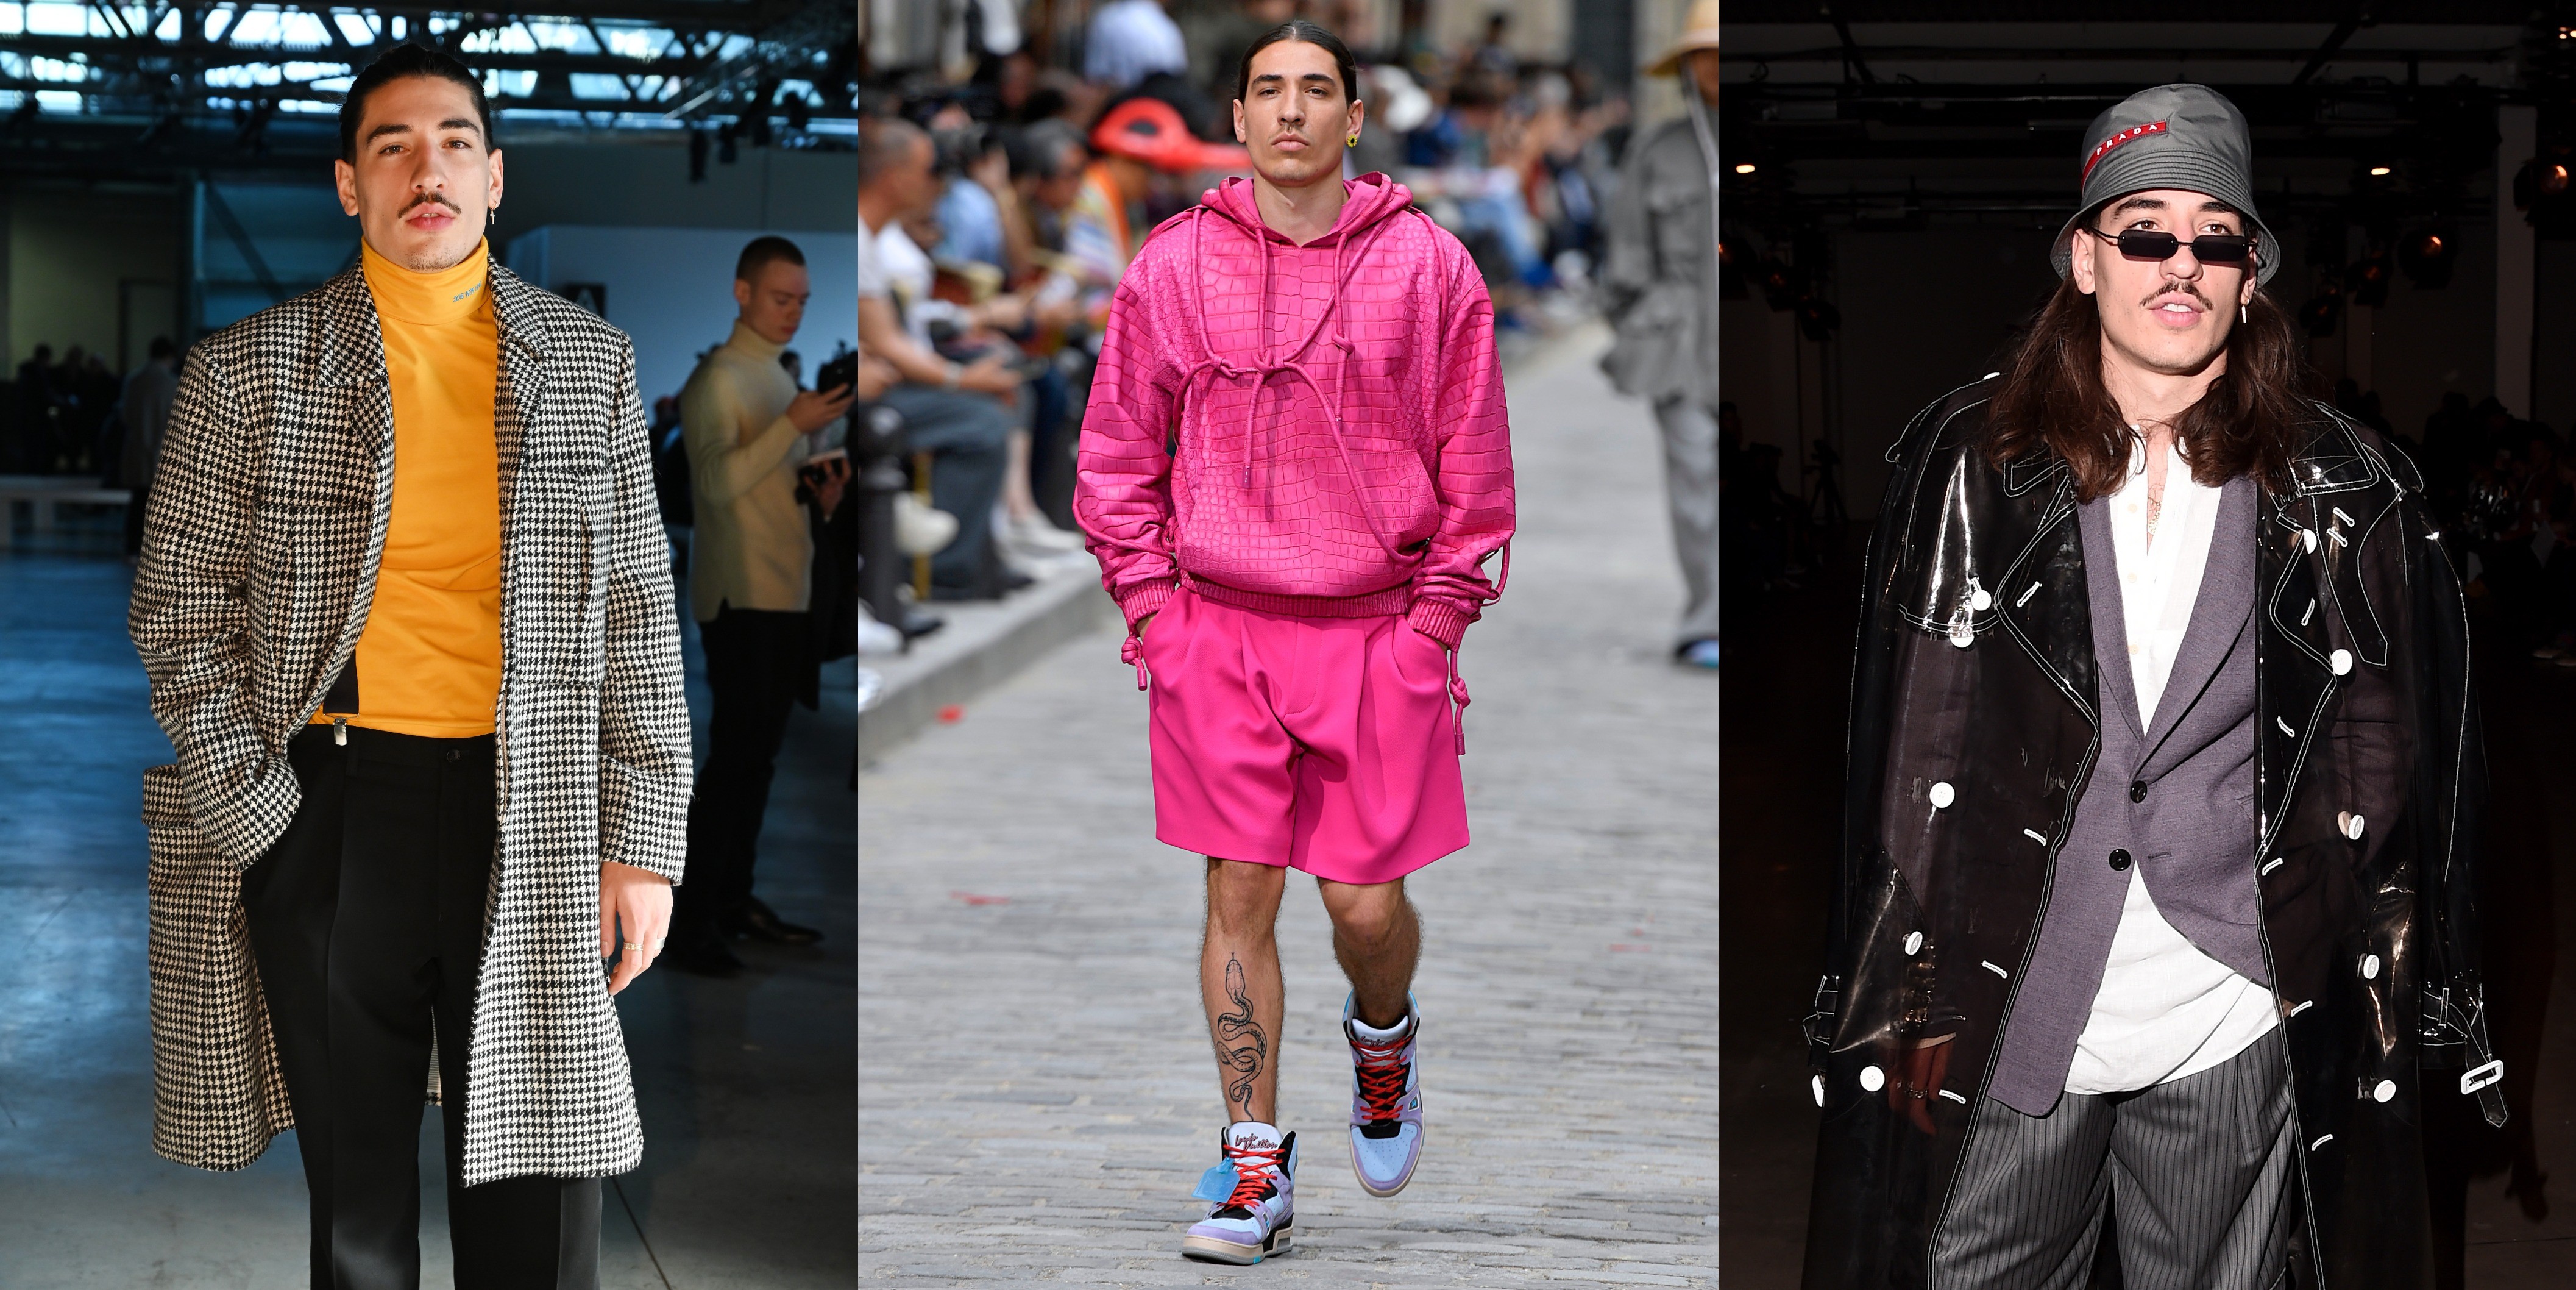 LIKE A MODEL: Bellerin - The Arsenal star is now a serious style icon